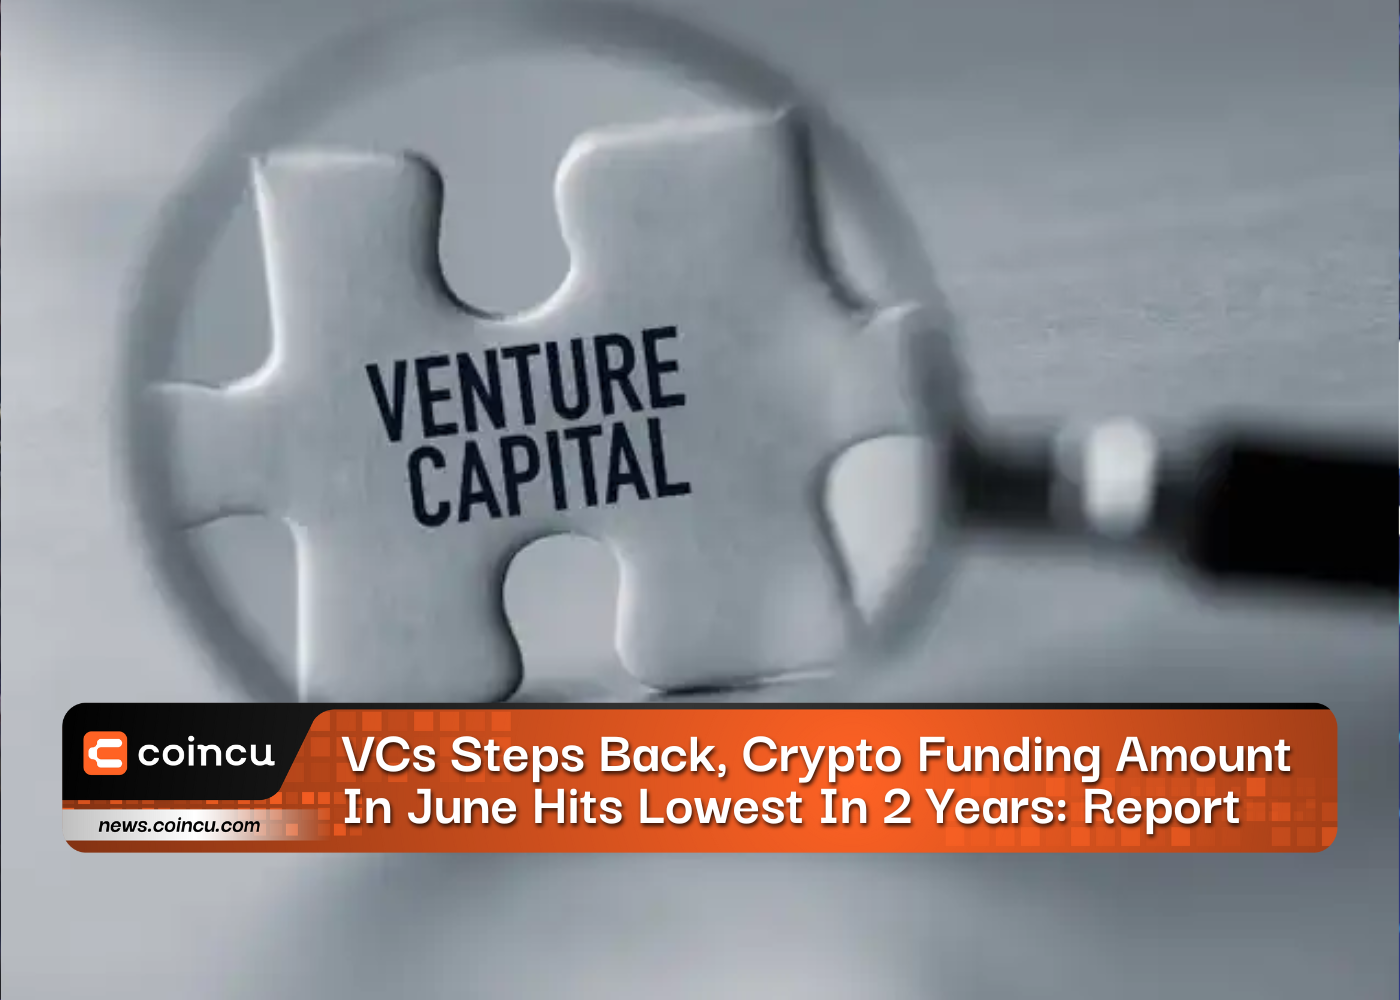 VCs Steps Back, Crypto Funding Amount In June Hits Lowest In 2 Years: Report